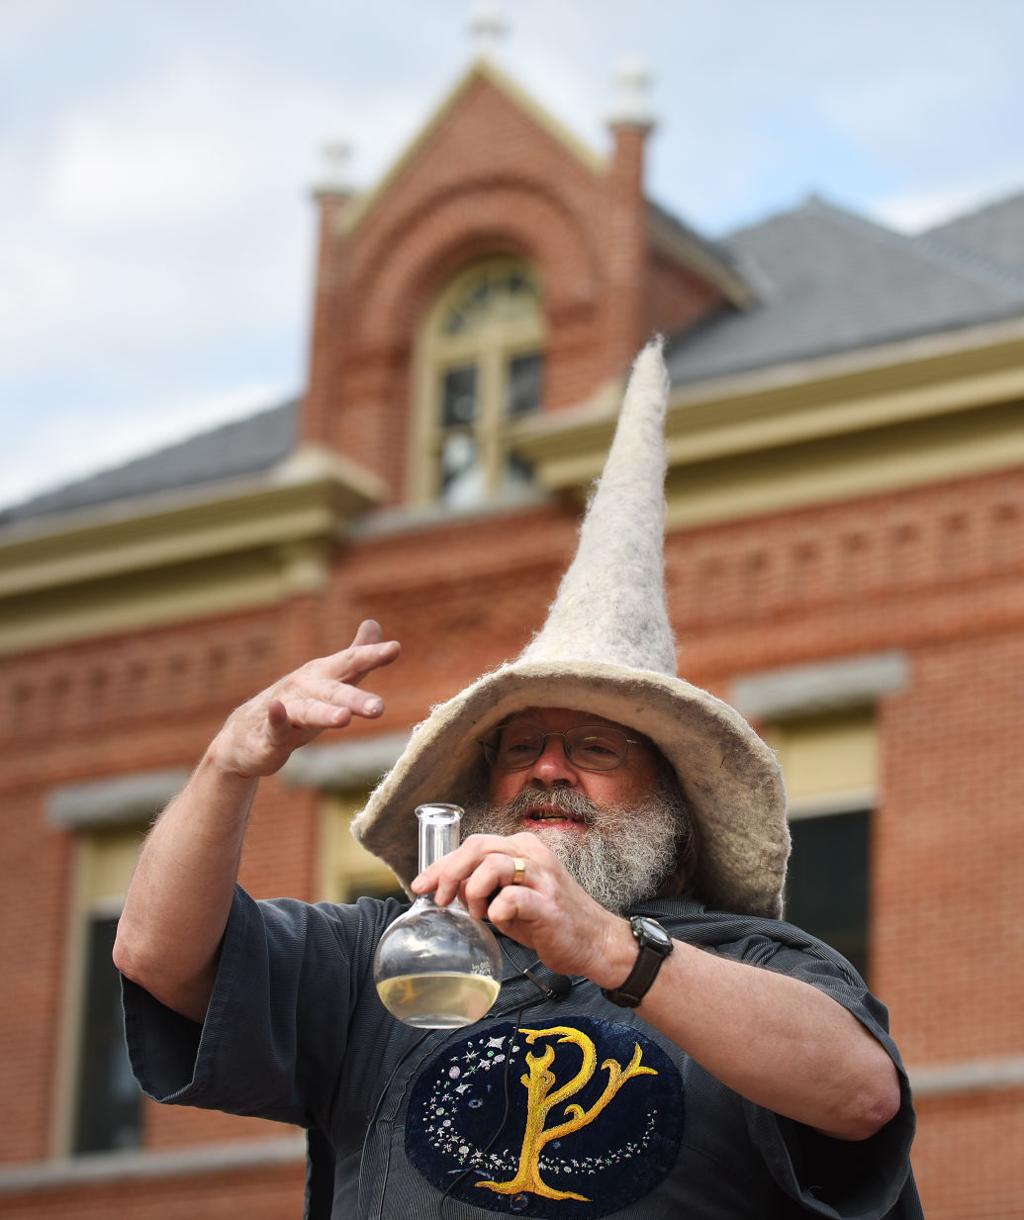 G Wiz the Wizard performing a spell